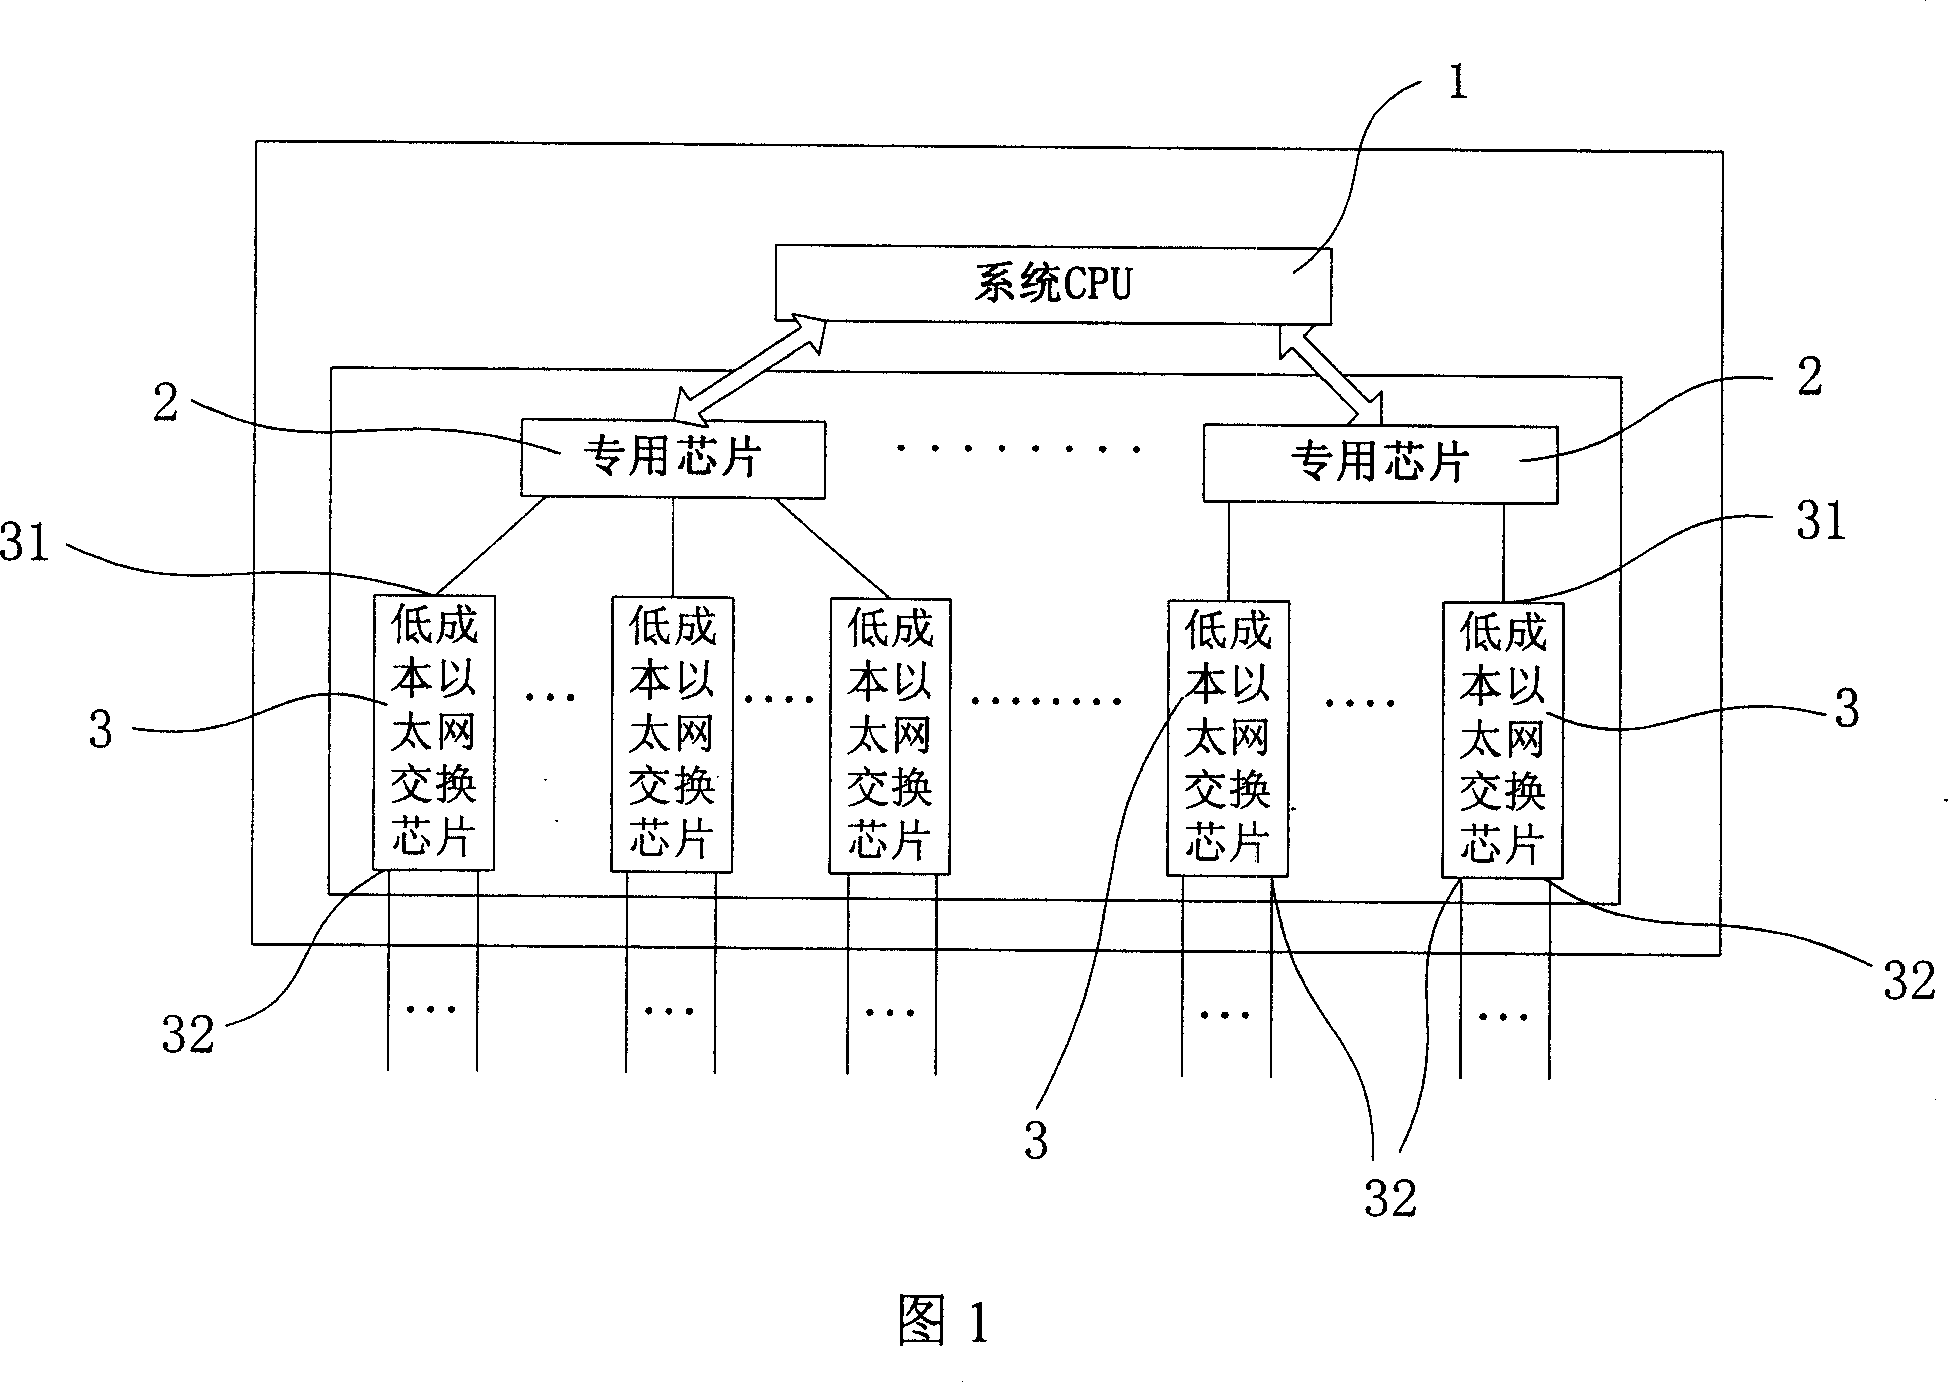 Switchboard system having port extending ability and method of realizing extending of port